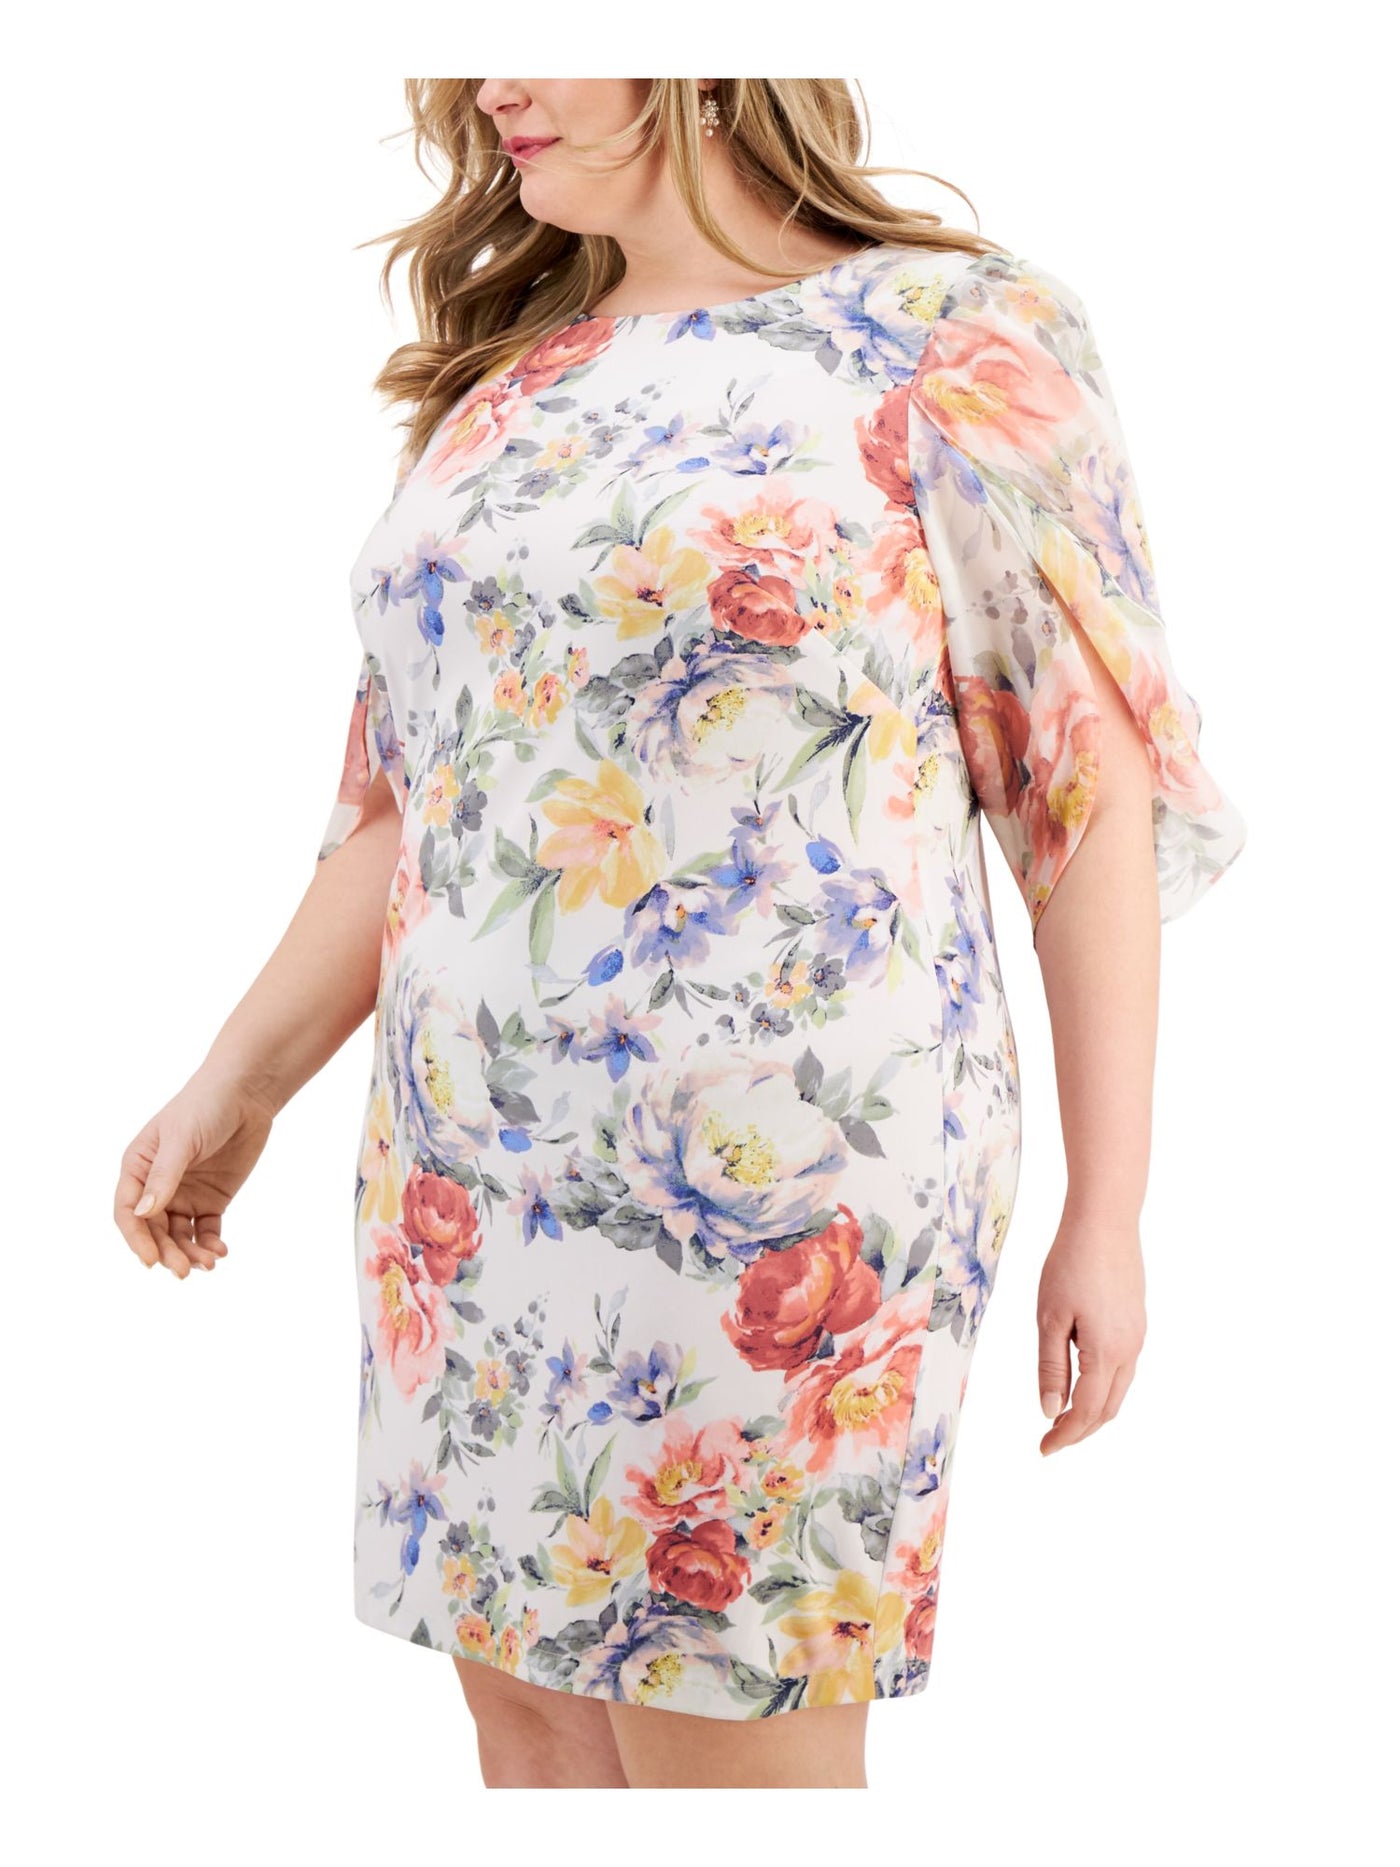 CONNECTED APPAREL Womens White Floral Petal Sleeve Round Neck Above The Knee Party Sheath Dress Plus 22W